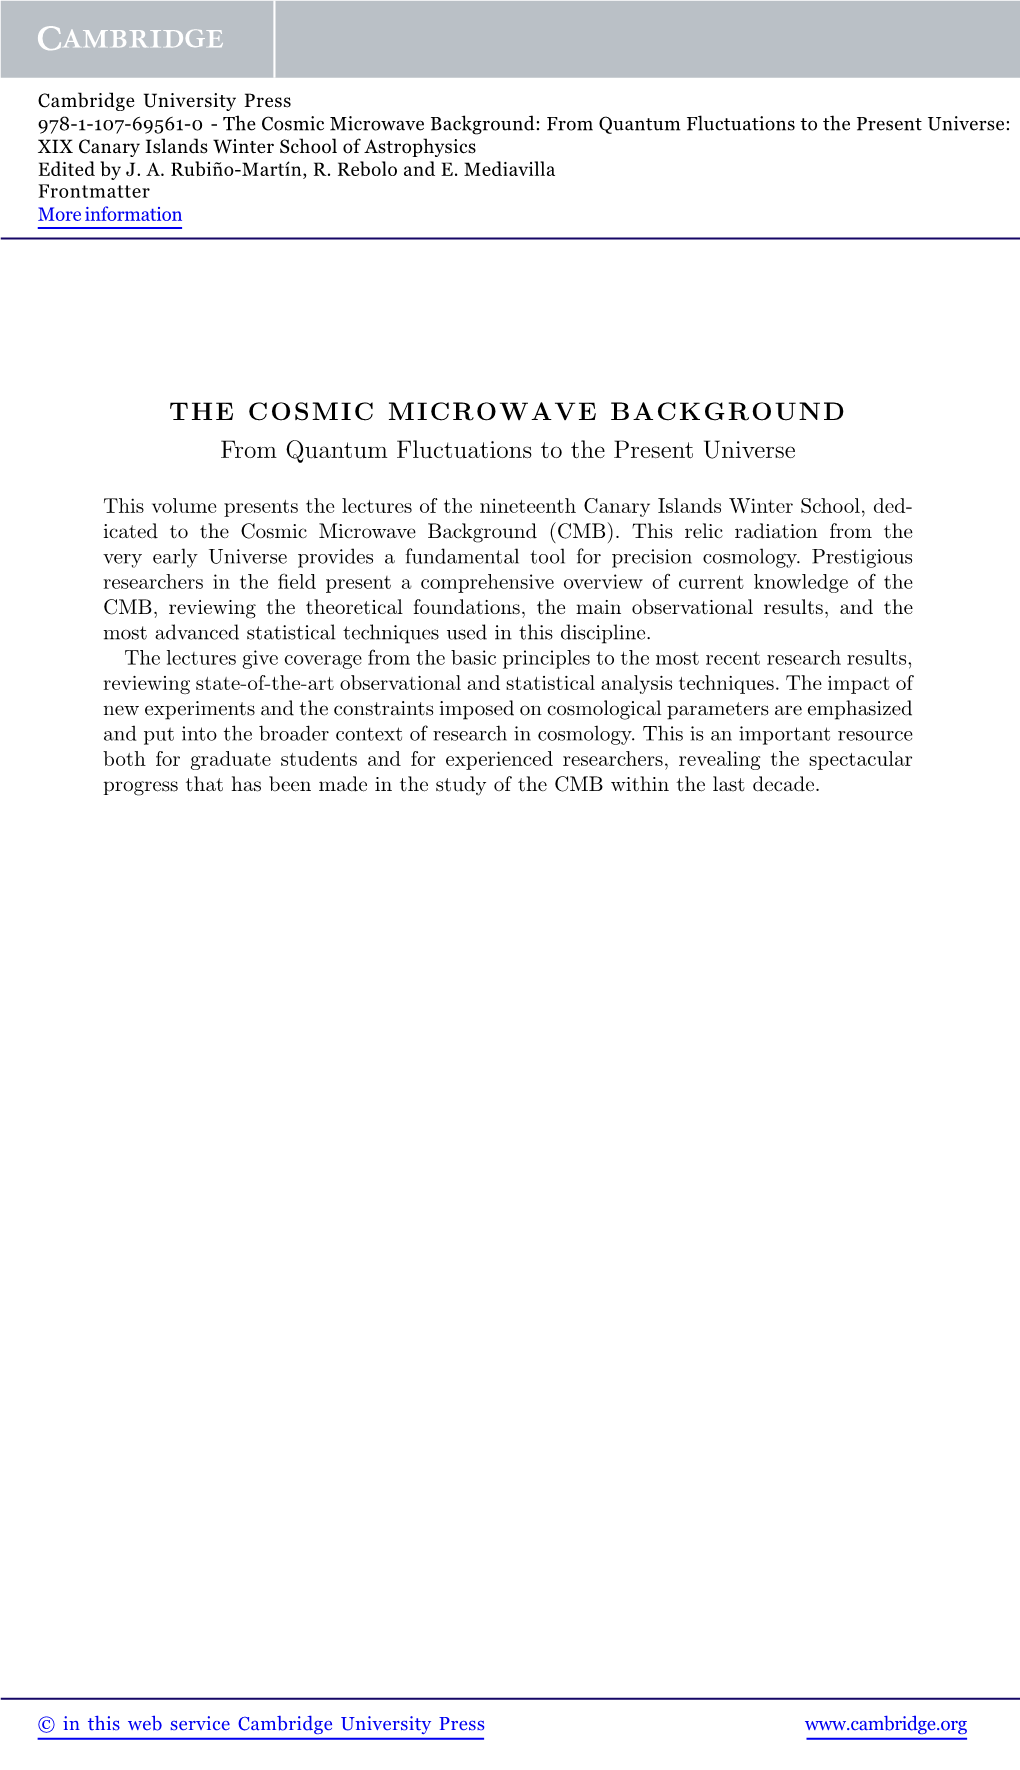 THE COSMIC MICROWAVE BACKGROUND from Quantum Fluctuations to the Present Universe